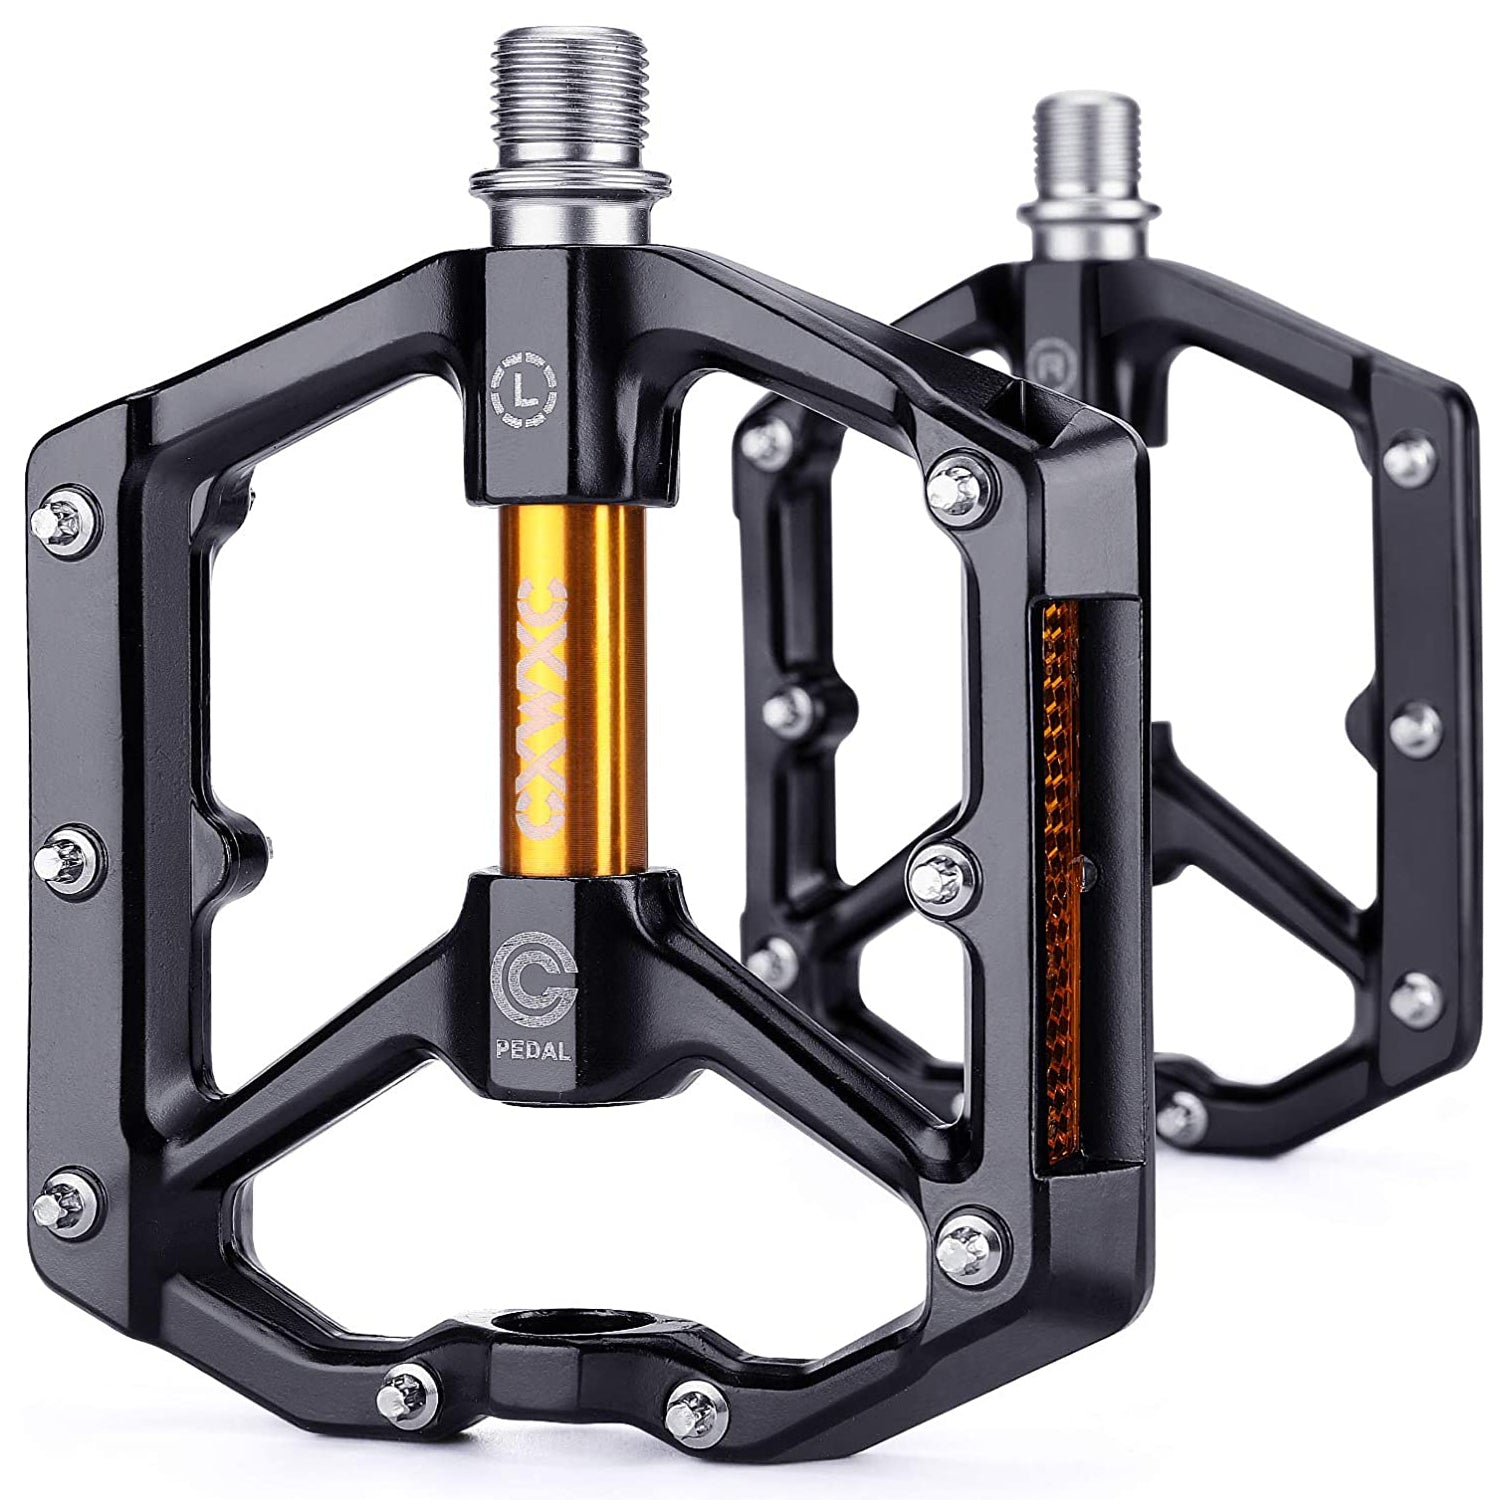 CXWXC Road/MTB Bike Pedals - Aluminum Alloy Bicycle Pedals - Mountain Bike Pedal with Removable Anti-Skid Nails